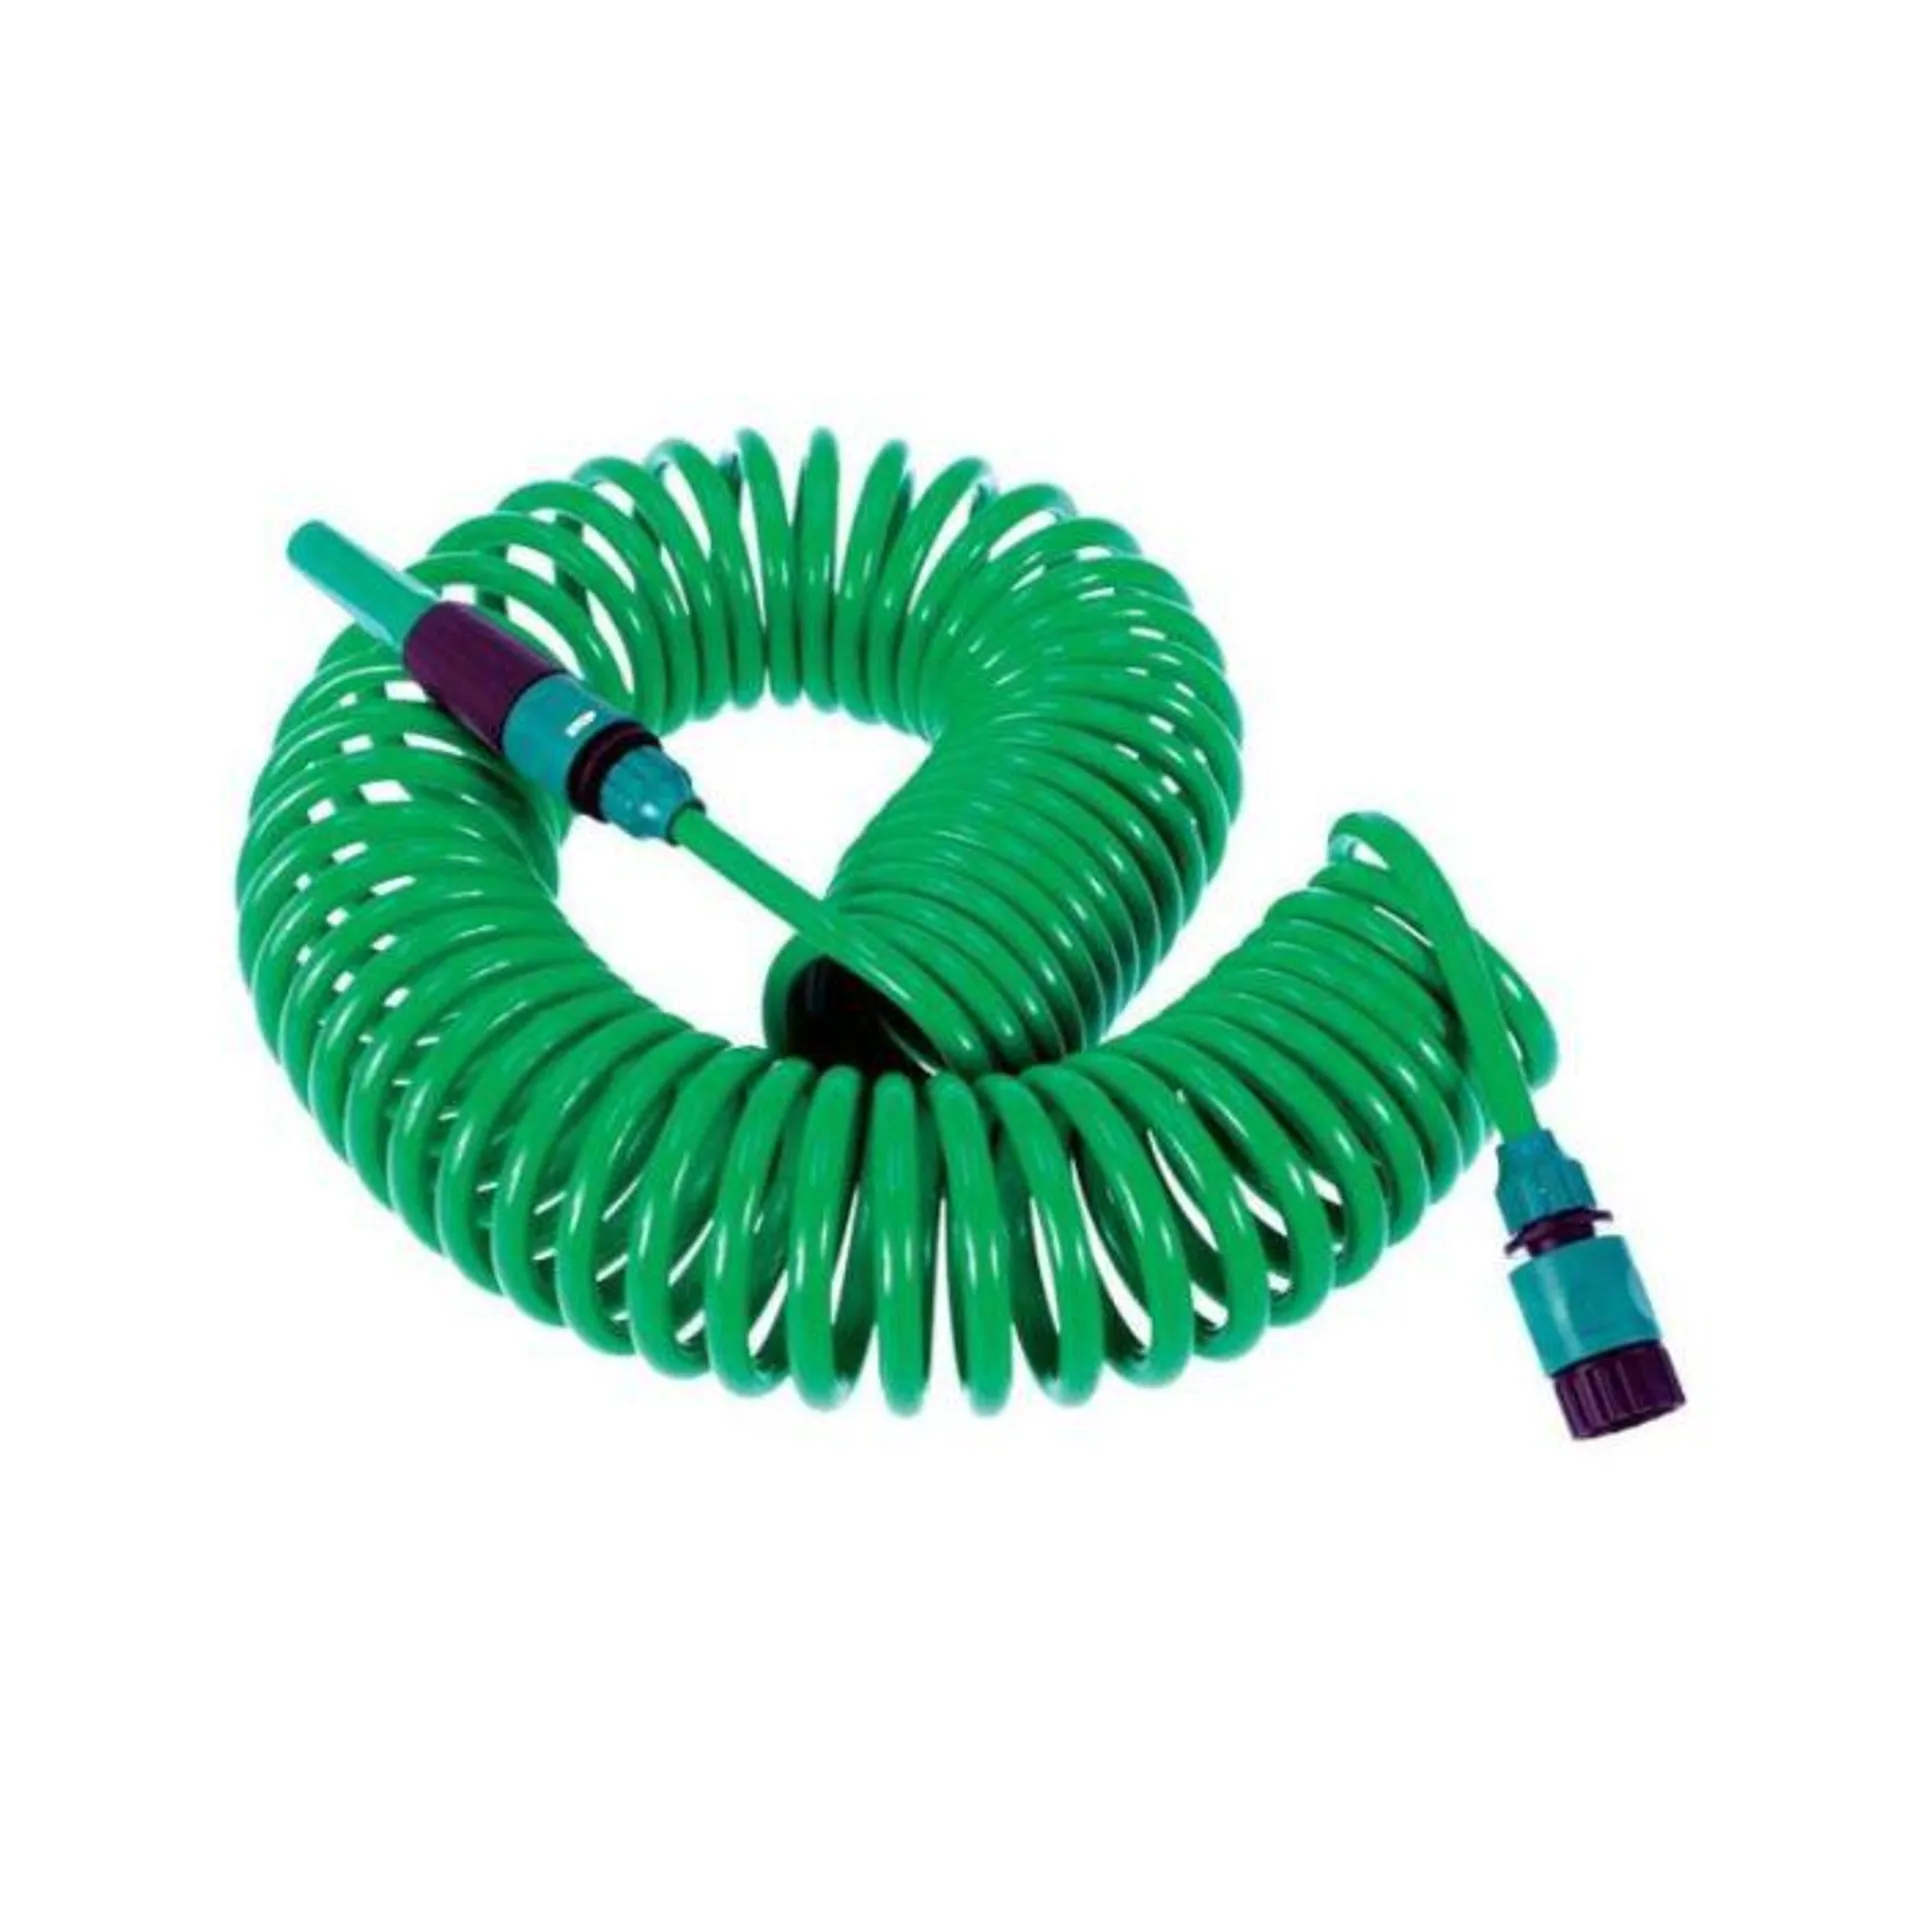 Autogear Retractable Hose With Fittings 15 Metre